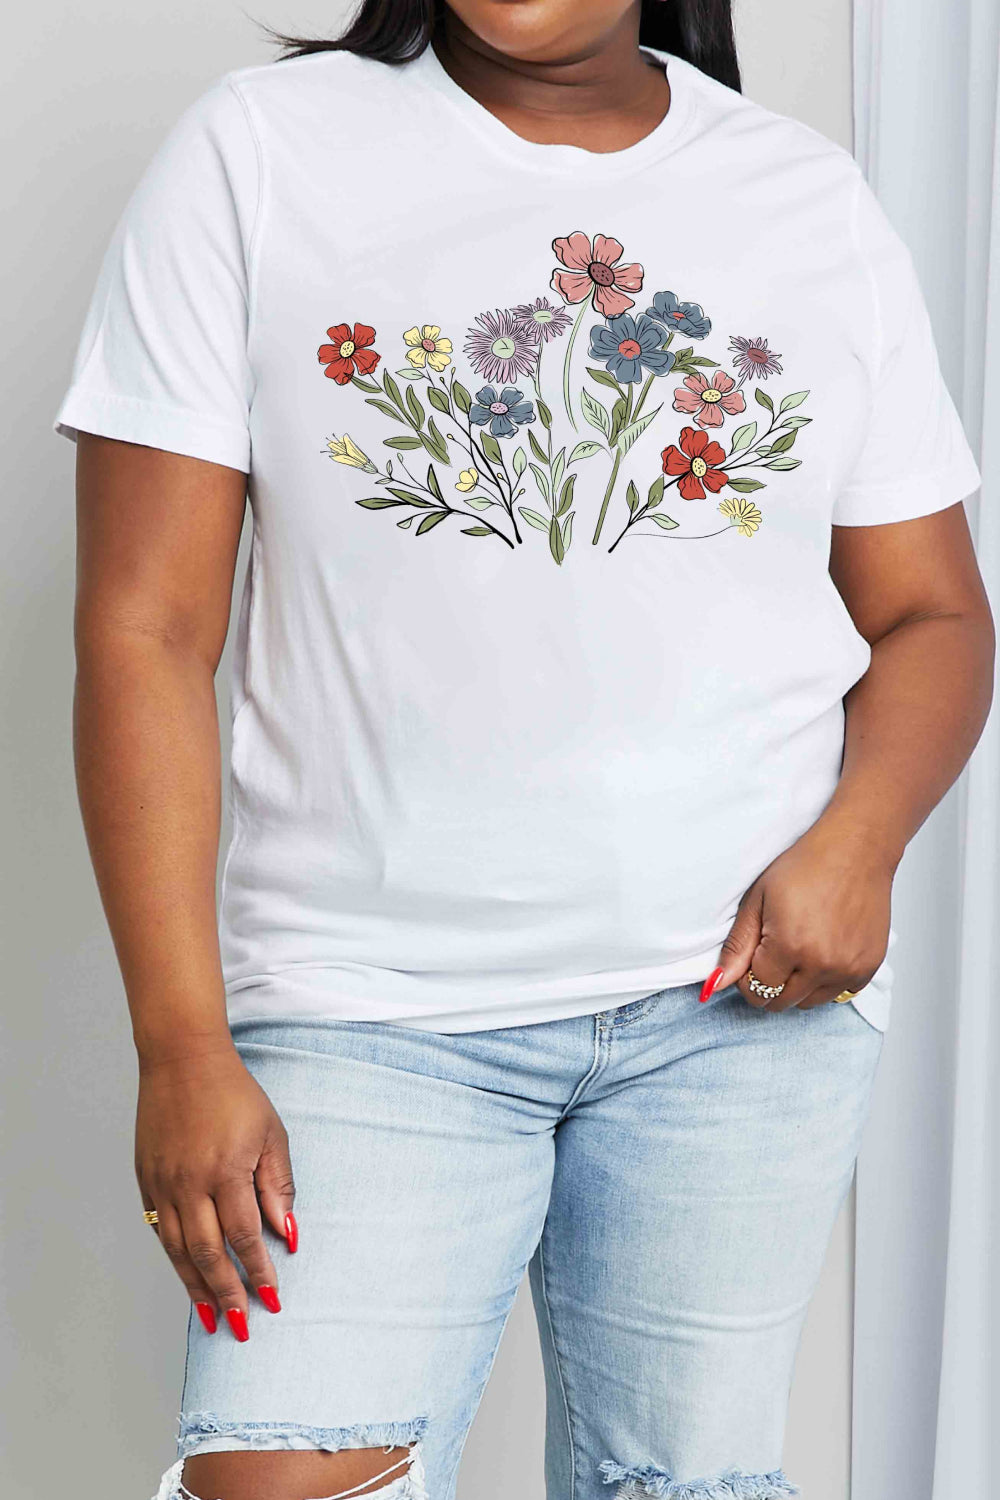 Flower Graphic Tee-SHIPS DIRECTLY TO YOU!